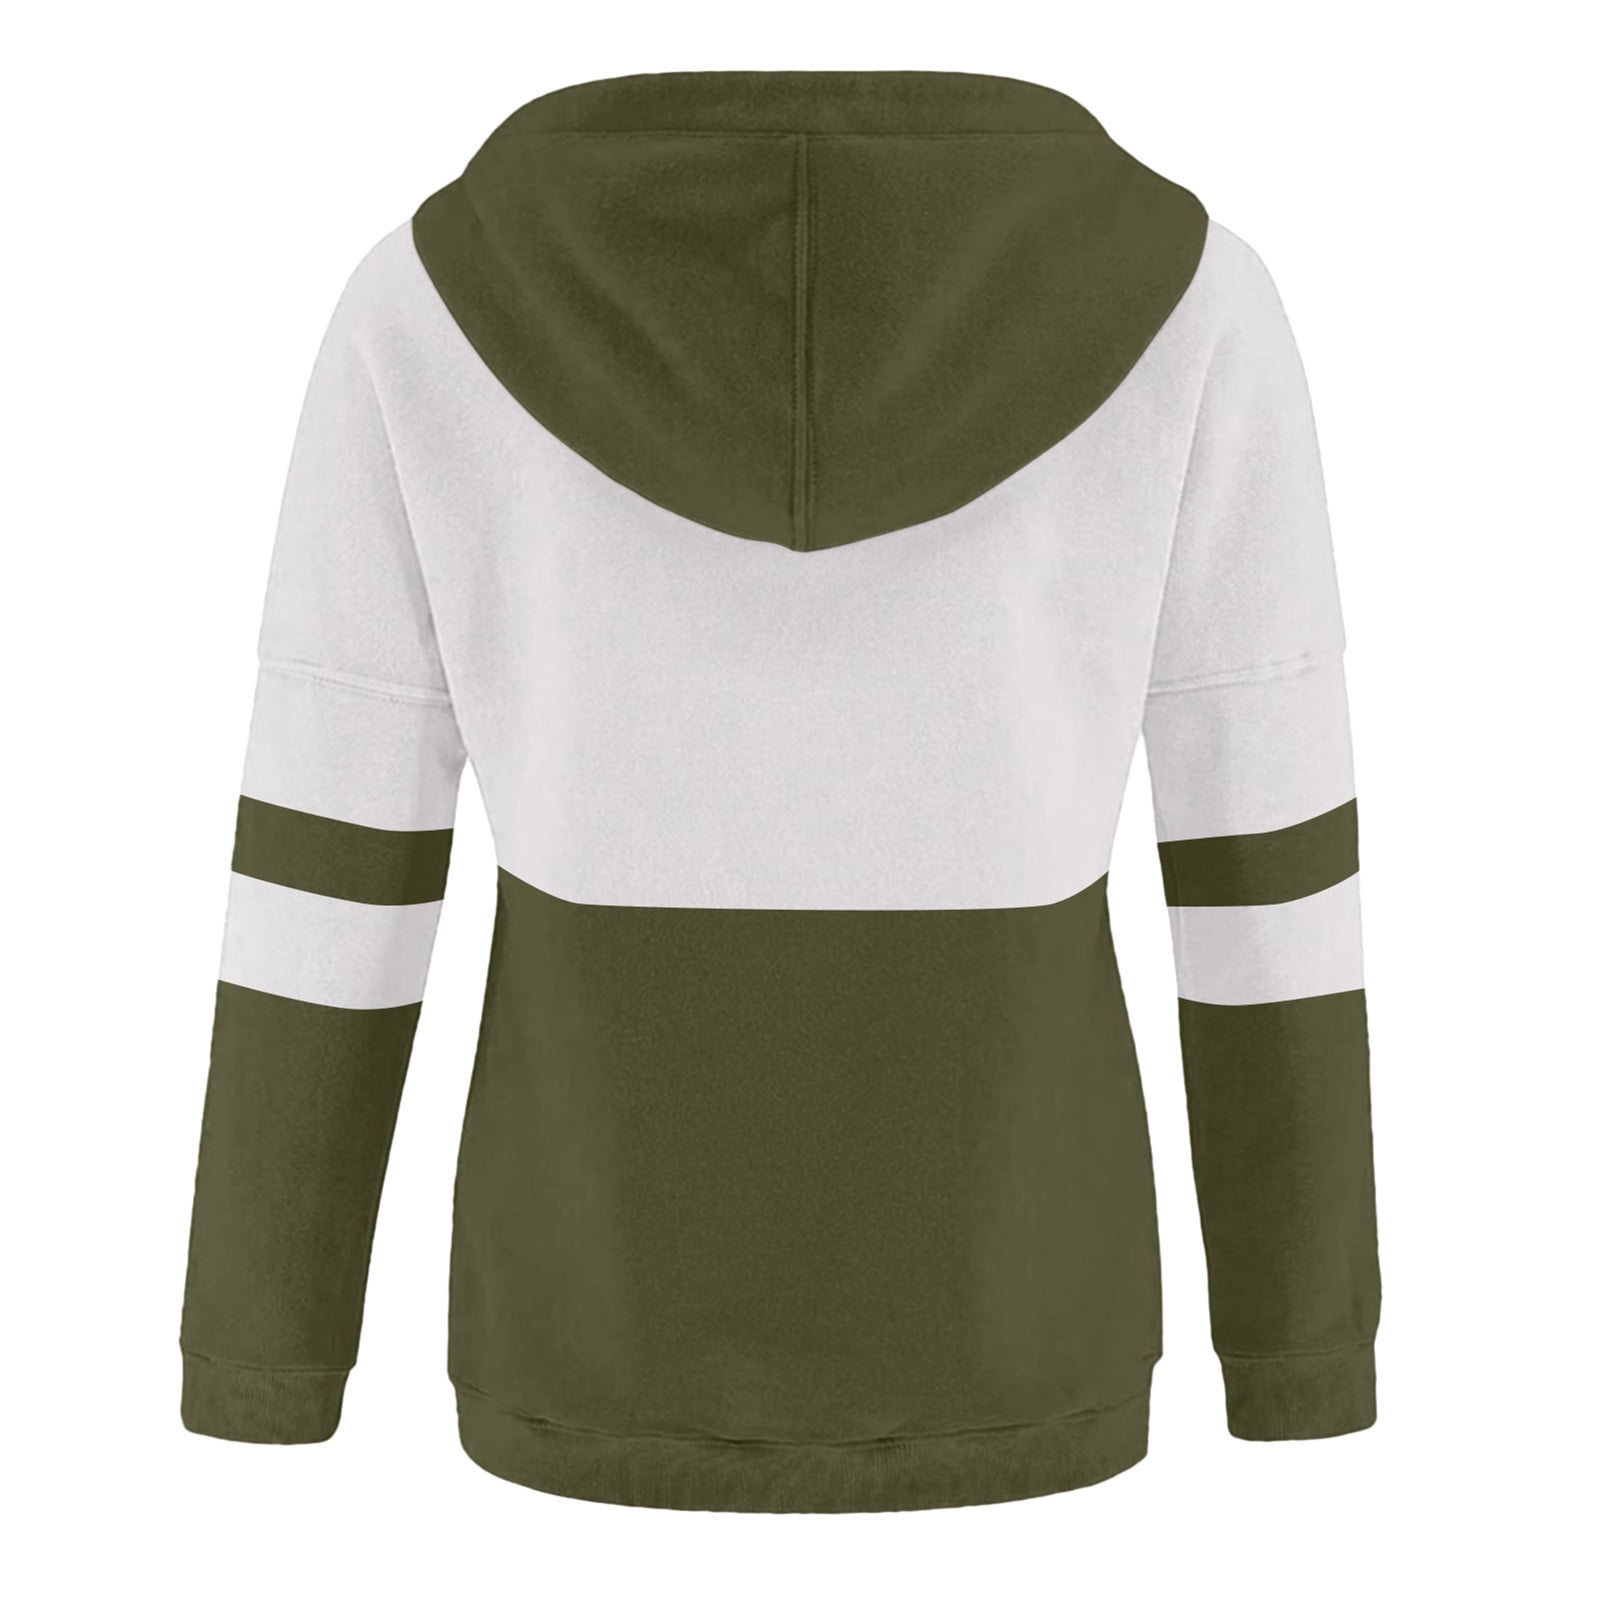  HUMMHUANJ Zip Up Hoodie Hoodie Sweatshirt,Items Under $1 Sale,Overstock  Items Clearance,Gift Under 5 Dollars,Previous Orders History,1 Cent Items, Clearance Swimsuits for Women : Sports & Outdoors